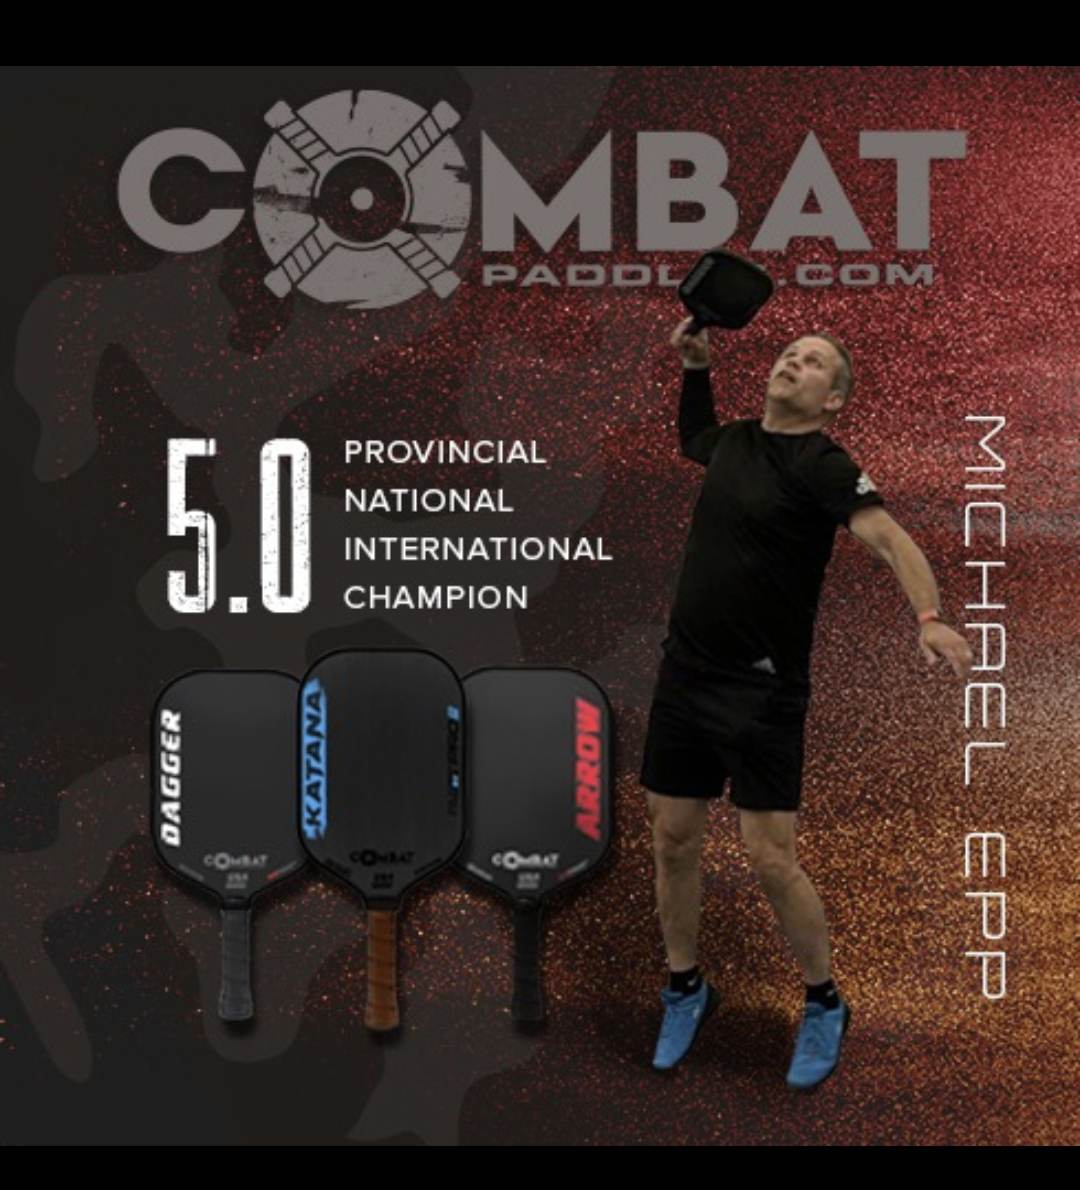 Home - Combat Paddles - Canada's premier pickleball paddle